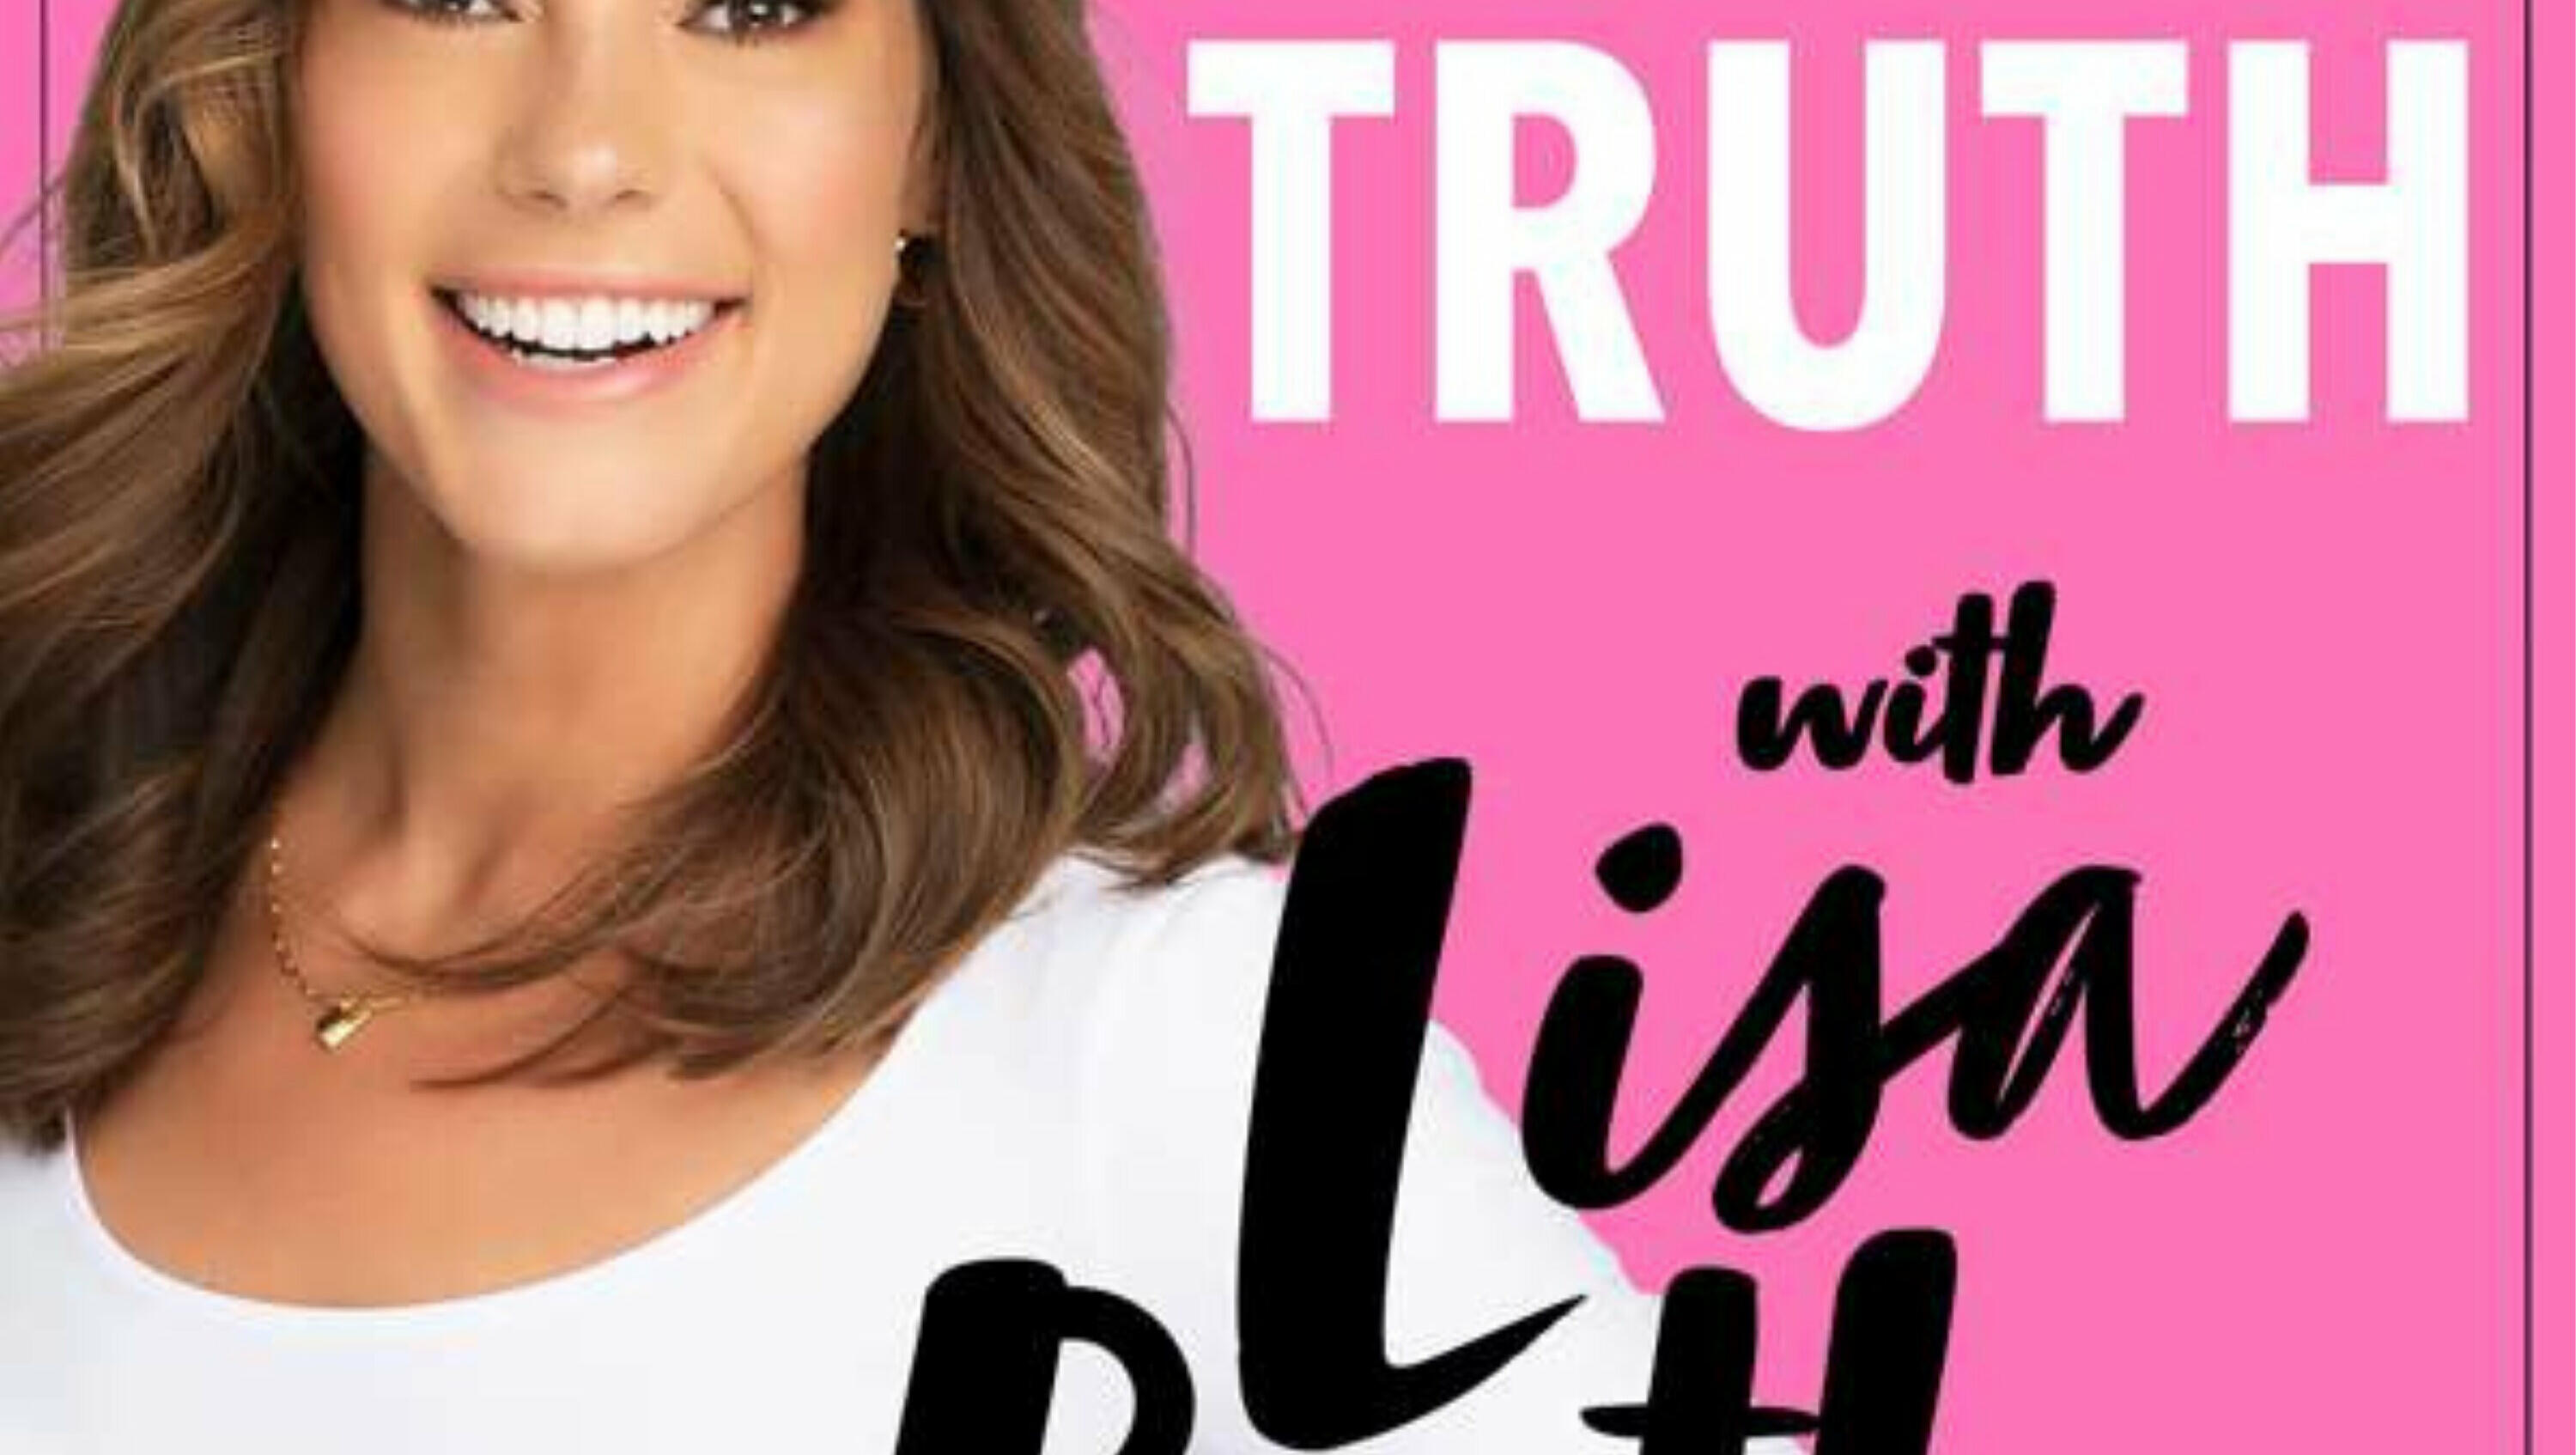 The Truth with Lisa Boothe: Hunter Biden Guilty and What's Next with Andy M